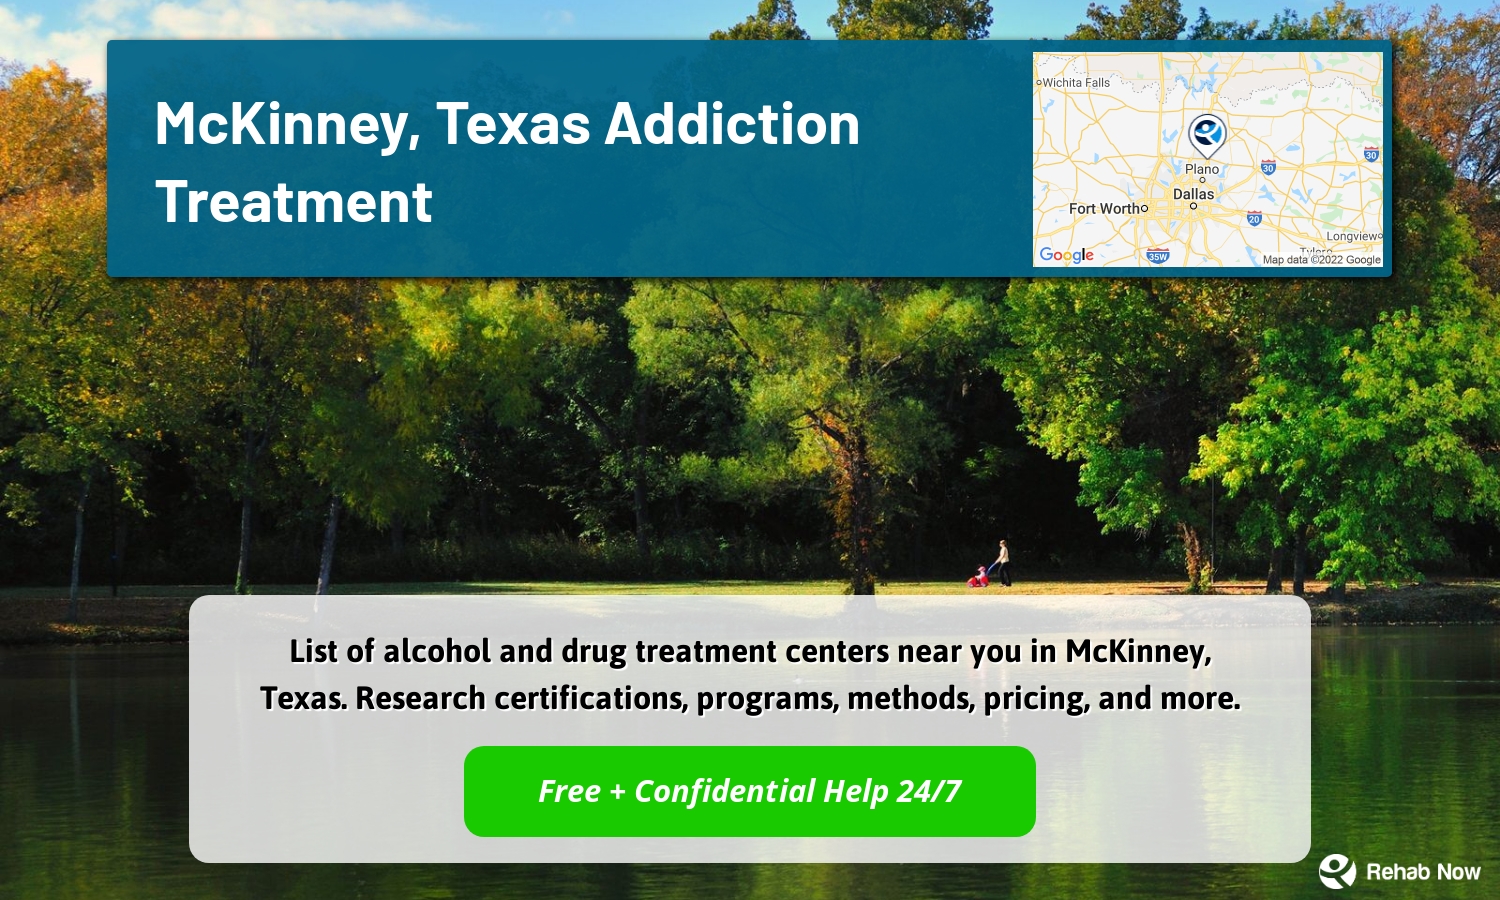 List of alcohol and drug treatment centers near you in McKinney, Texas. Research certifications, programs, methods, pricing, and more.